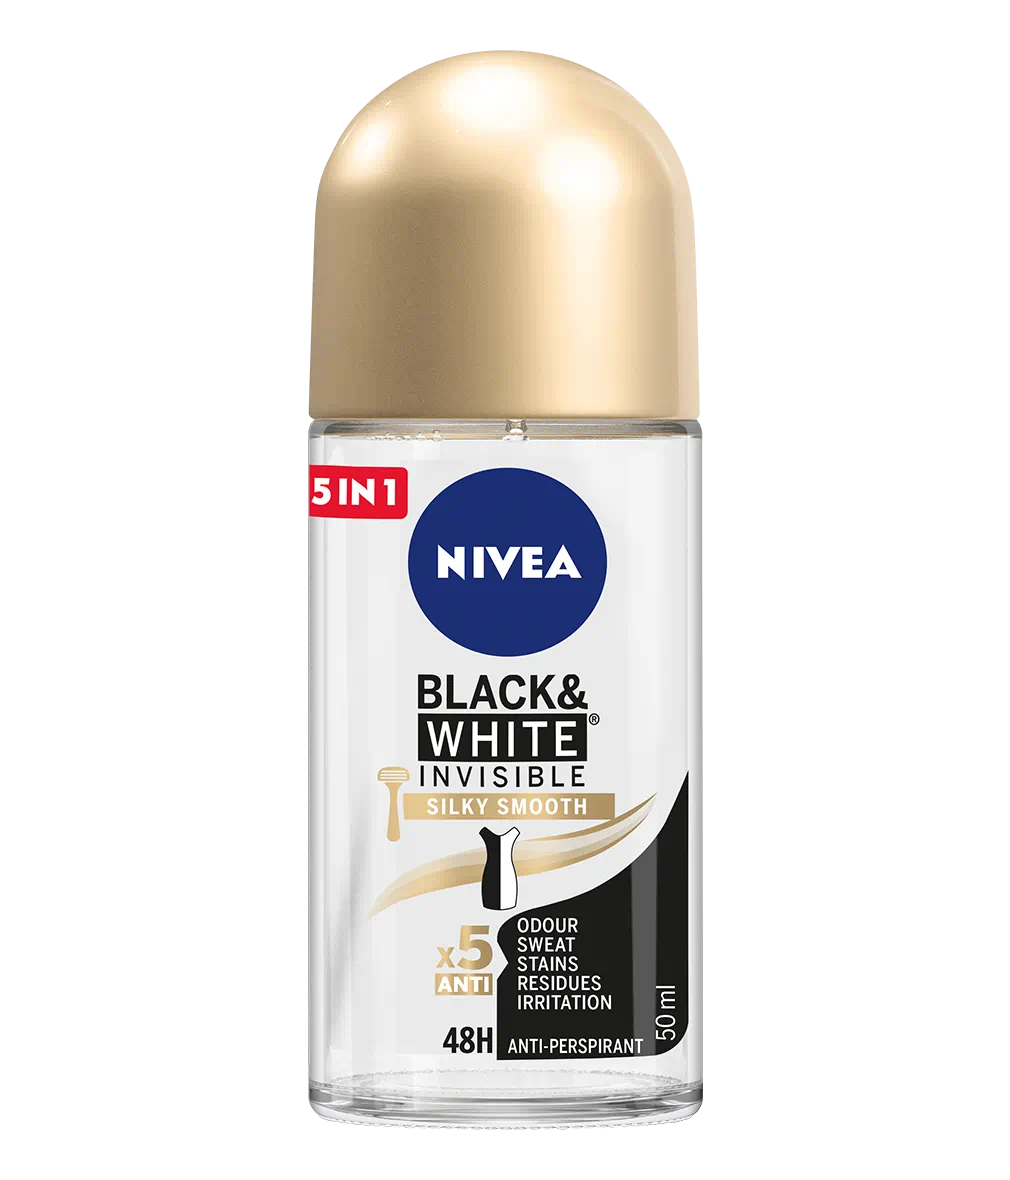 NIVEA - Hello GOLD! ⭐️ NIVEA's Invisible Black & White Silky Smooth  deodorant glides on your skin leaving it feeling just like silk even after  hair removal while giving you 48hr protection